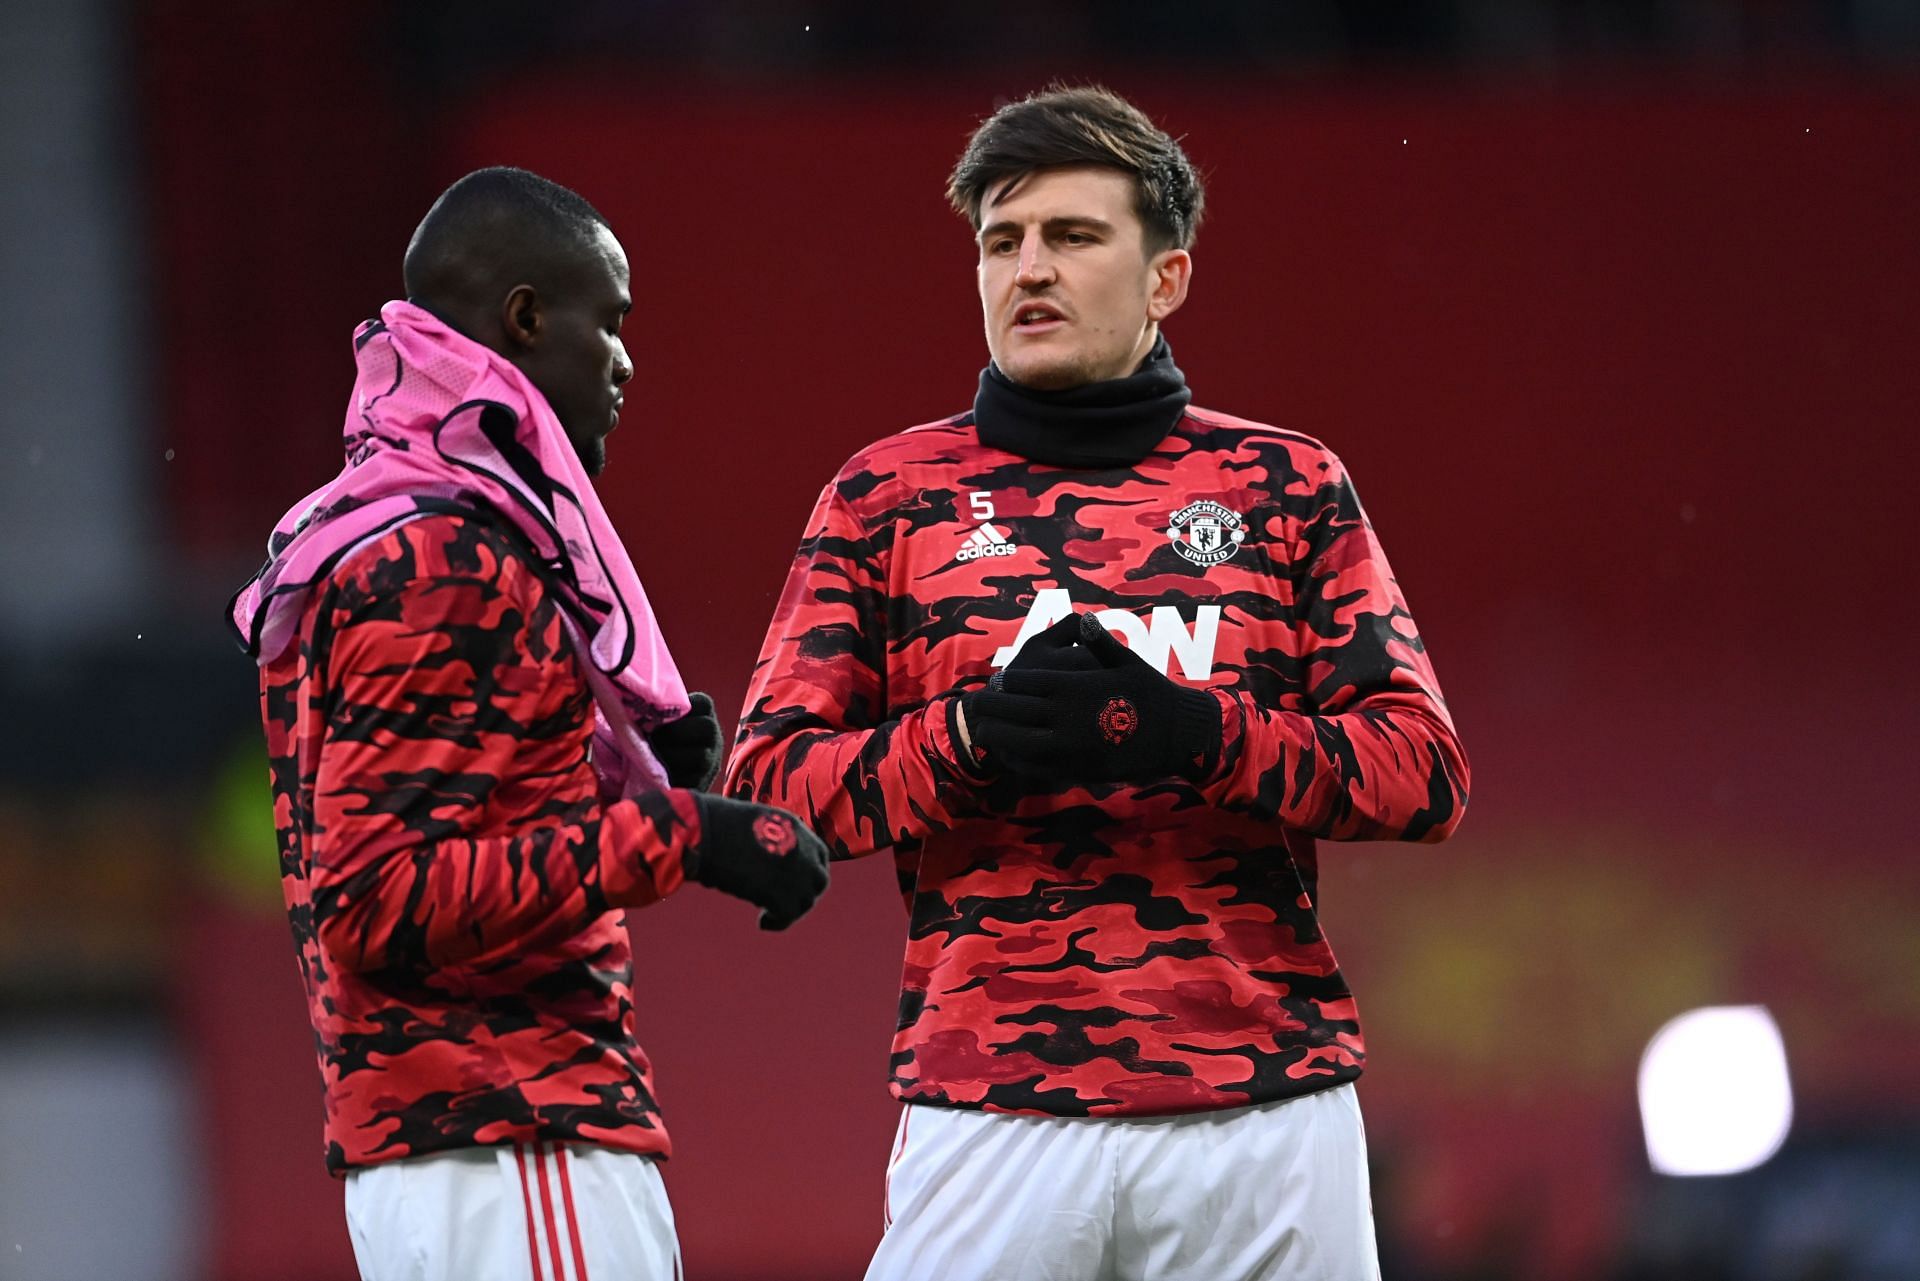 Bailly seems bemused that Maguire started over him